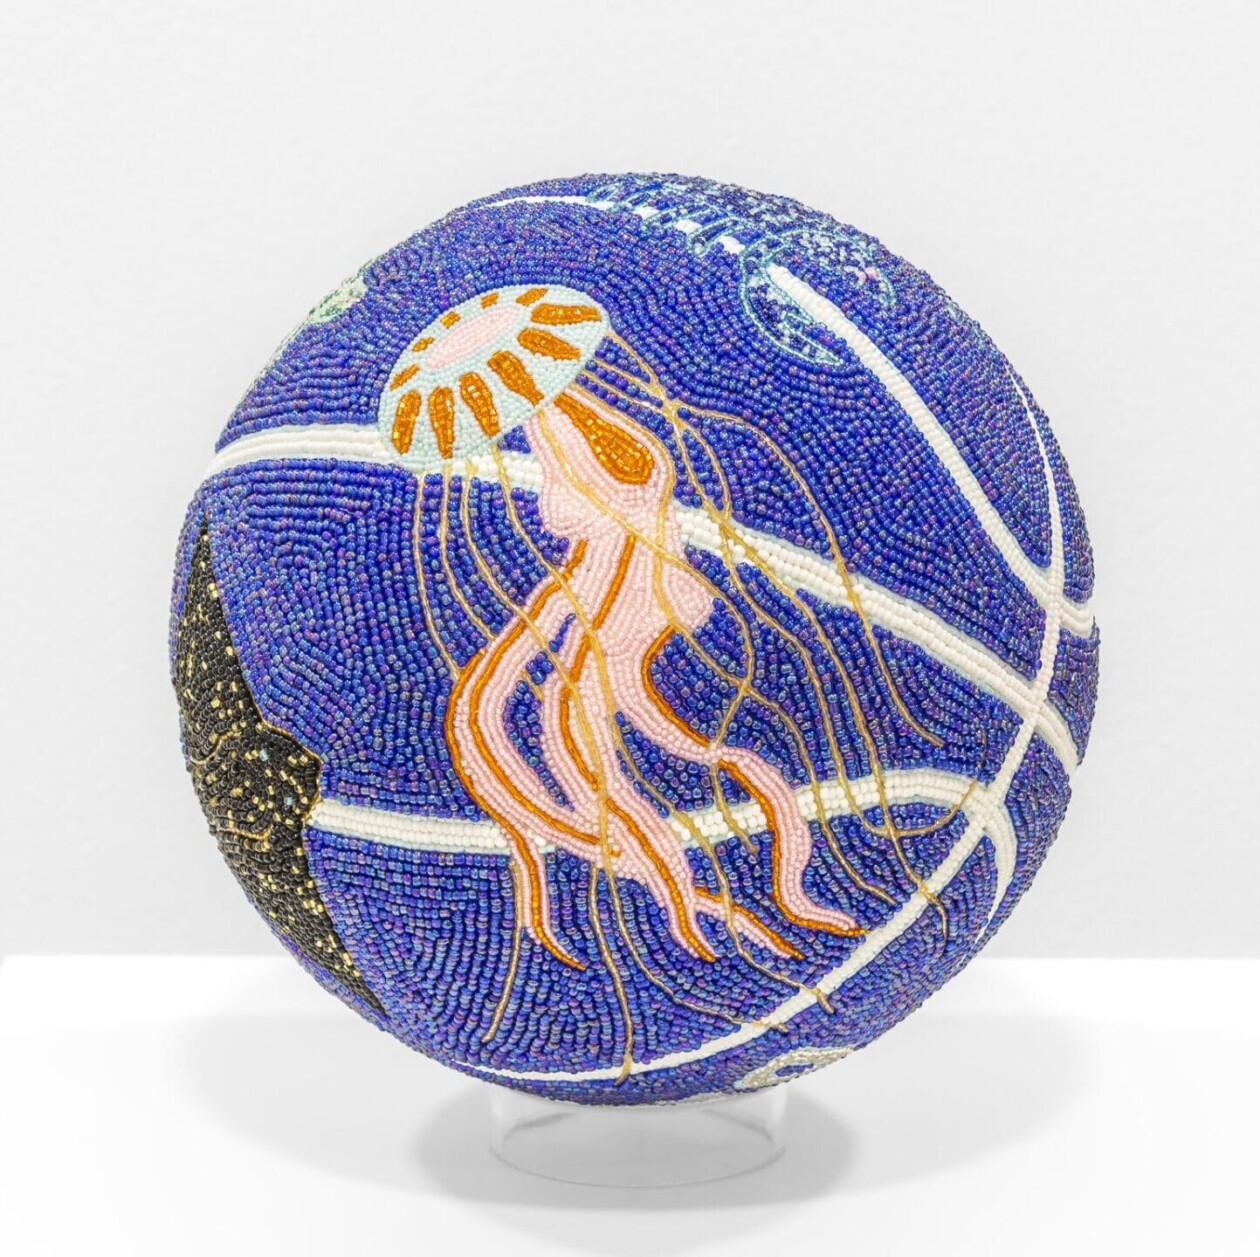 From Playground To Prophecy, Jorge Mañes Rubio's Beaded Basketball Sculptures (11)